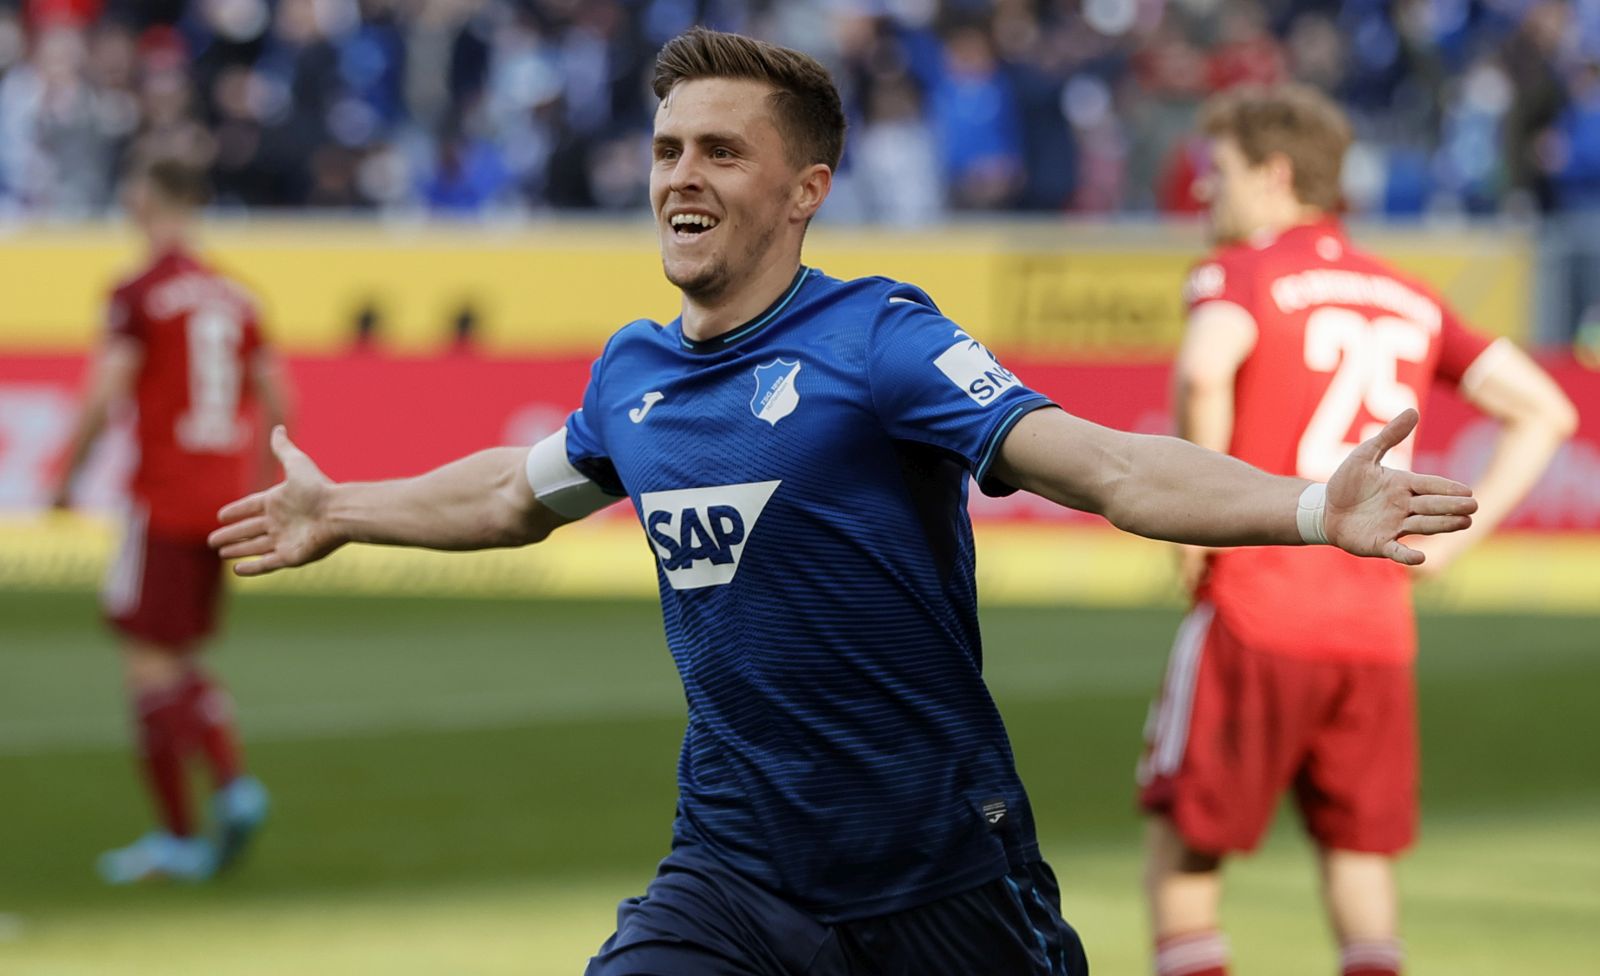 epa09819173 Hoffenheim's Christoph Baumgartner celebrates after scoring the opening goal during the German Bundesliga soccer match between TSG 1899 Hoffenheim and FC Bayern Munich in Sinsheim, Germany, 12 March 2022.  EPA/RONALD WITTEK CONDITIONS - ATTENTION: The DFL regulations prohibit any use of photographs as image sequences and/or quasi-video.